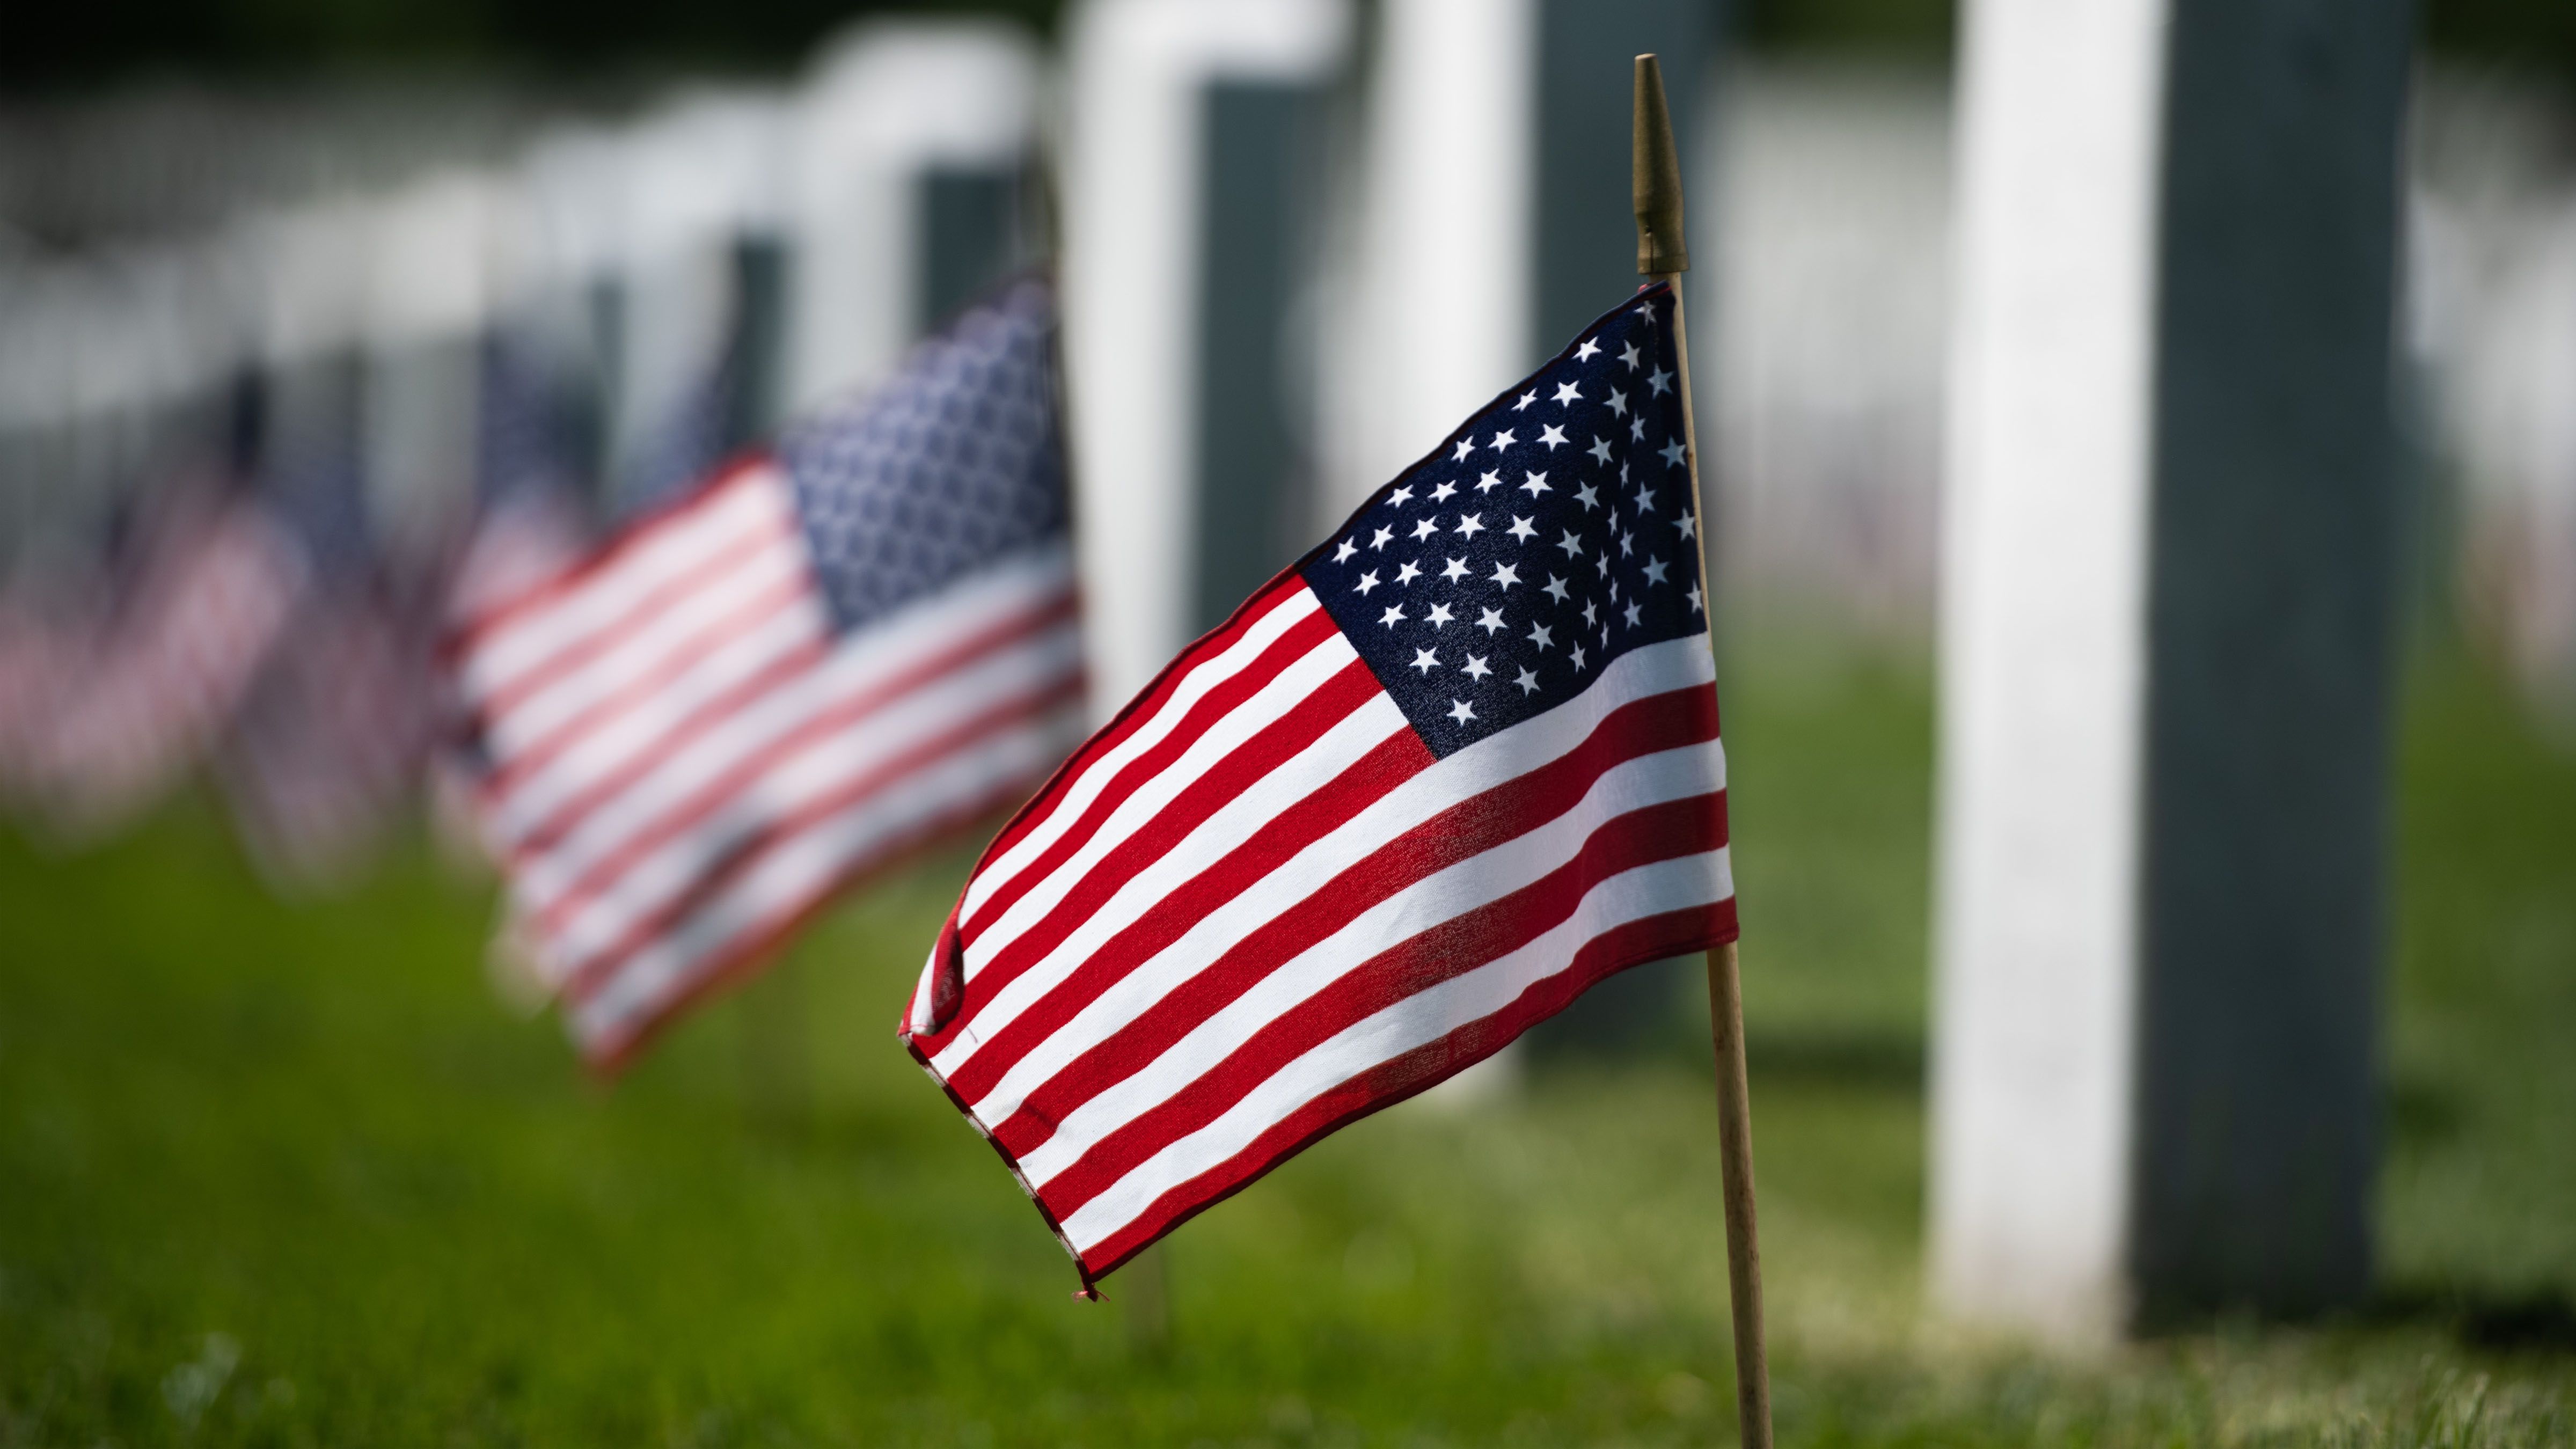 Ideas To Celebrate Memorial Day A Brief History Behind Memorial Day